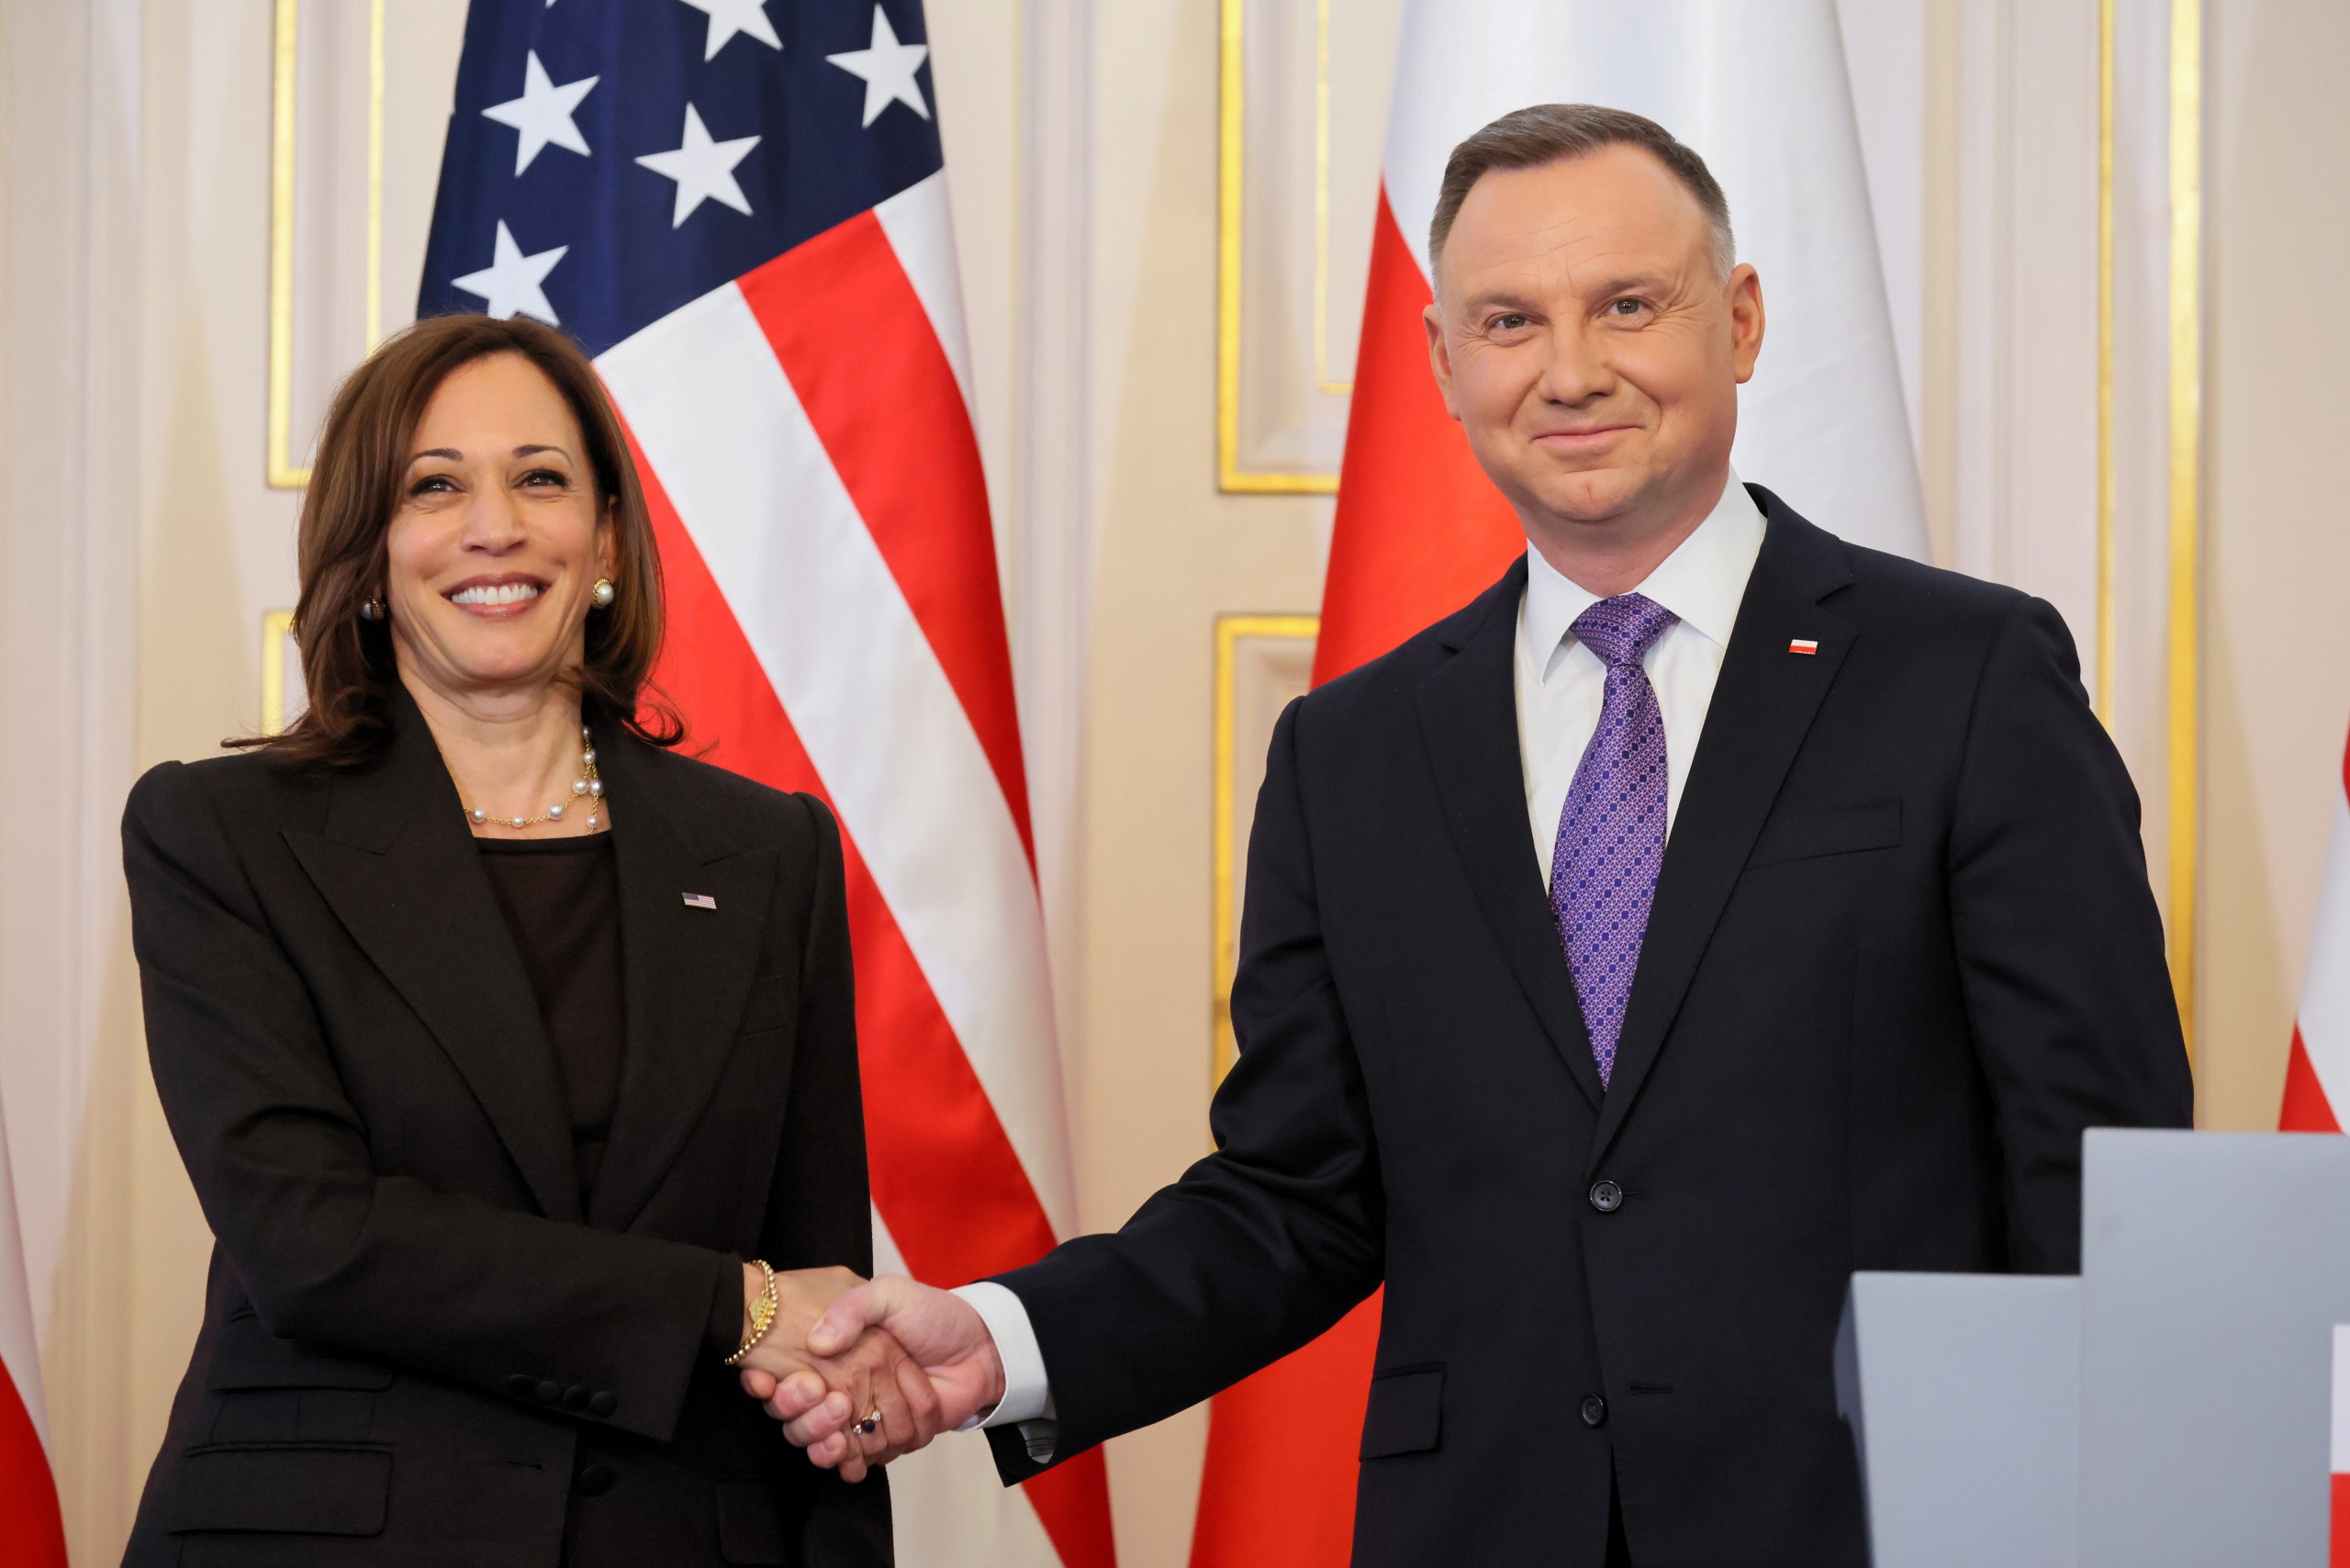 epa09814513 U.S. vice president Kamala Harris (L) and Polish President Andrzej Duda (R) attend a press conference after their meeting at the Belvedere Palace in Warsaw, Poland, 10 March 2022. The visit of the US vice president is a demonstration of the United States' support for NATO's eastern flank allies in the face of Russian aggression on Ukraine.  EPA/LESZEK SZYMANSKI POLAND OUT